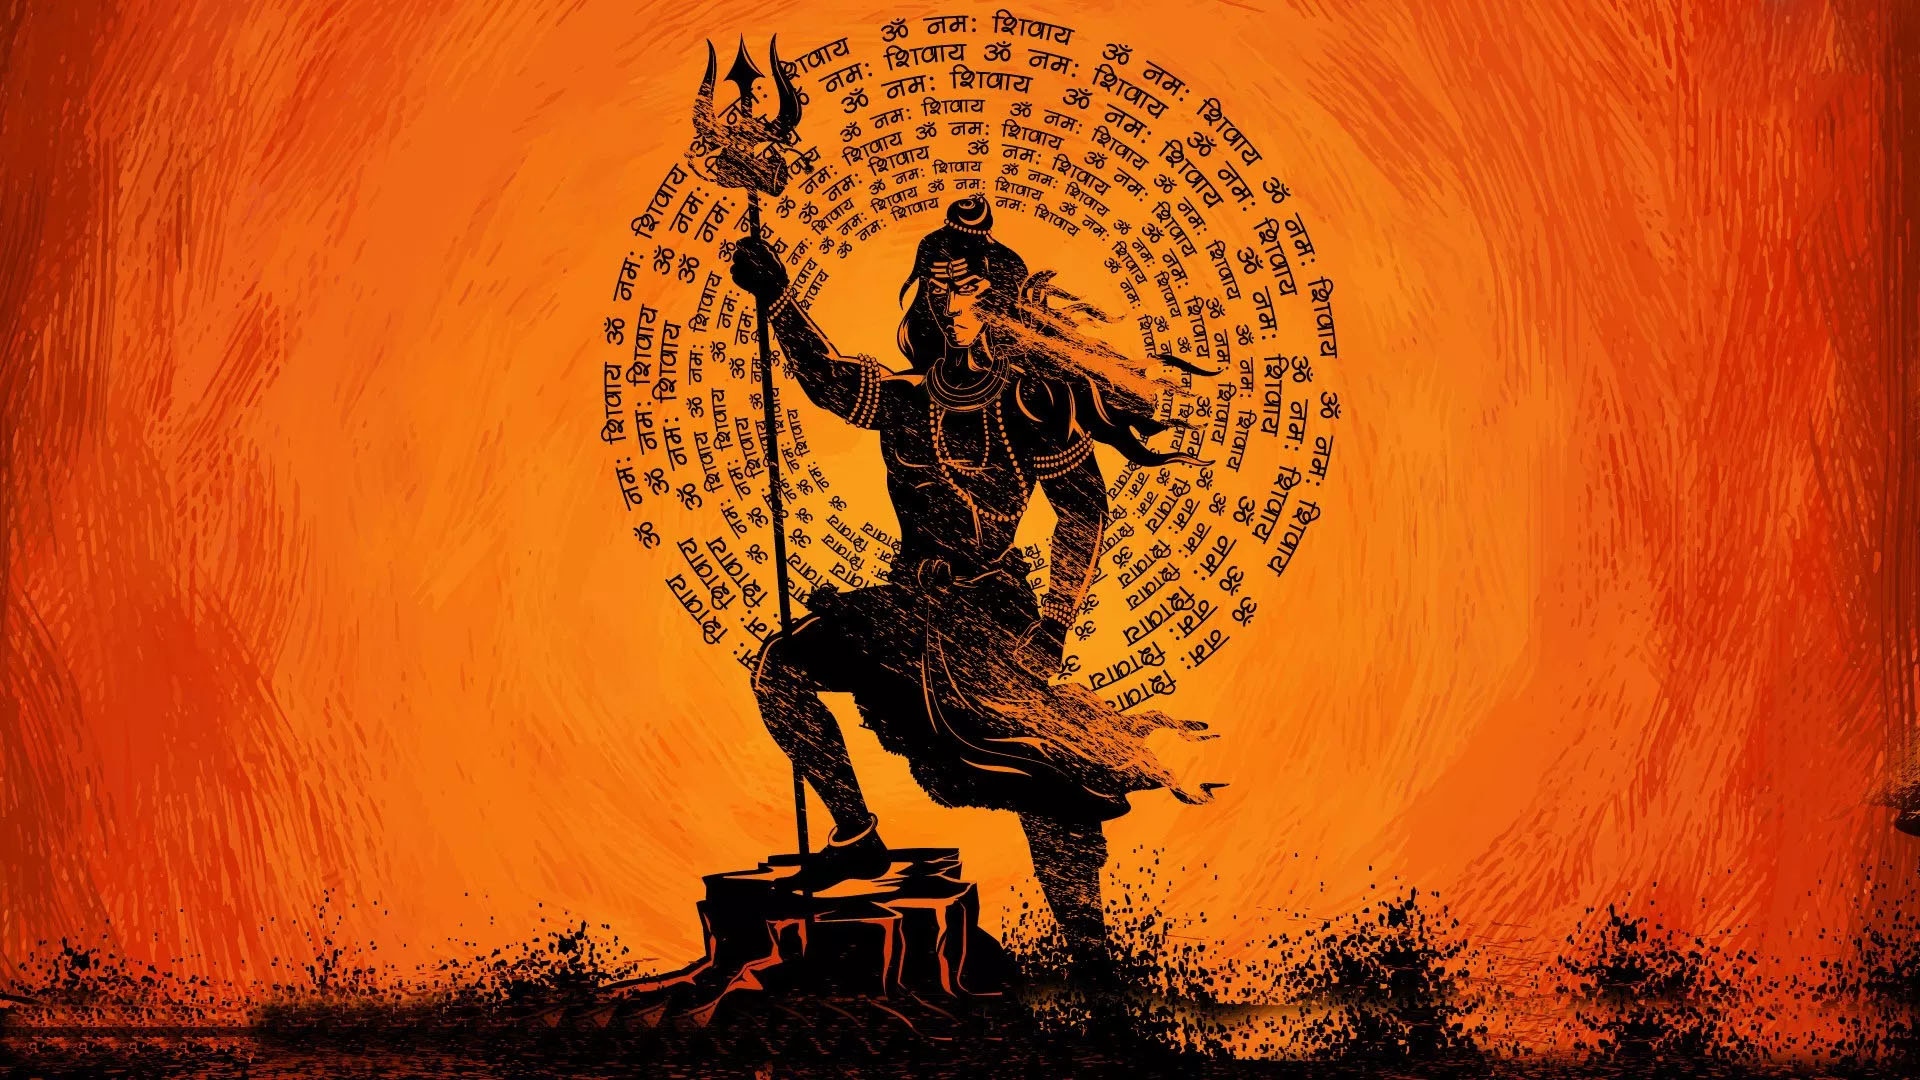 Sivan Images - Lord Shiva - Painting Background